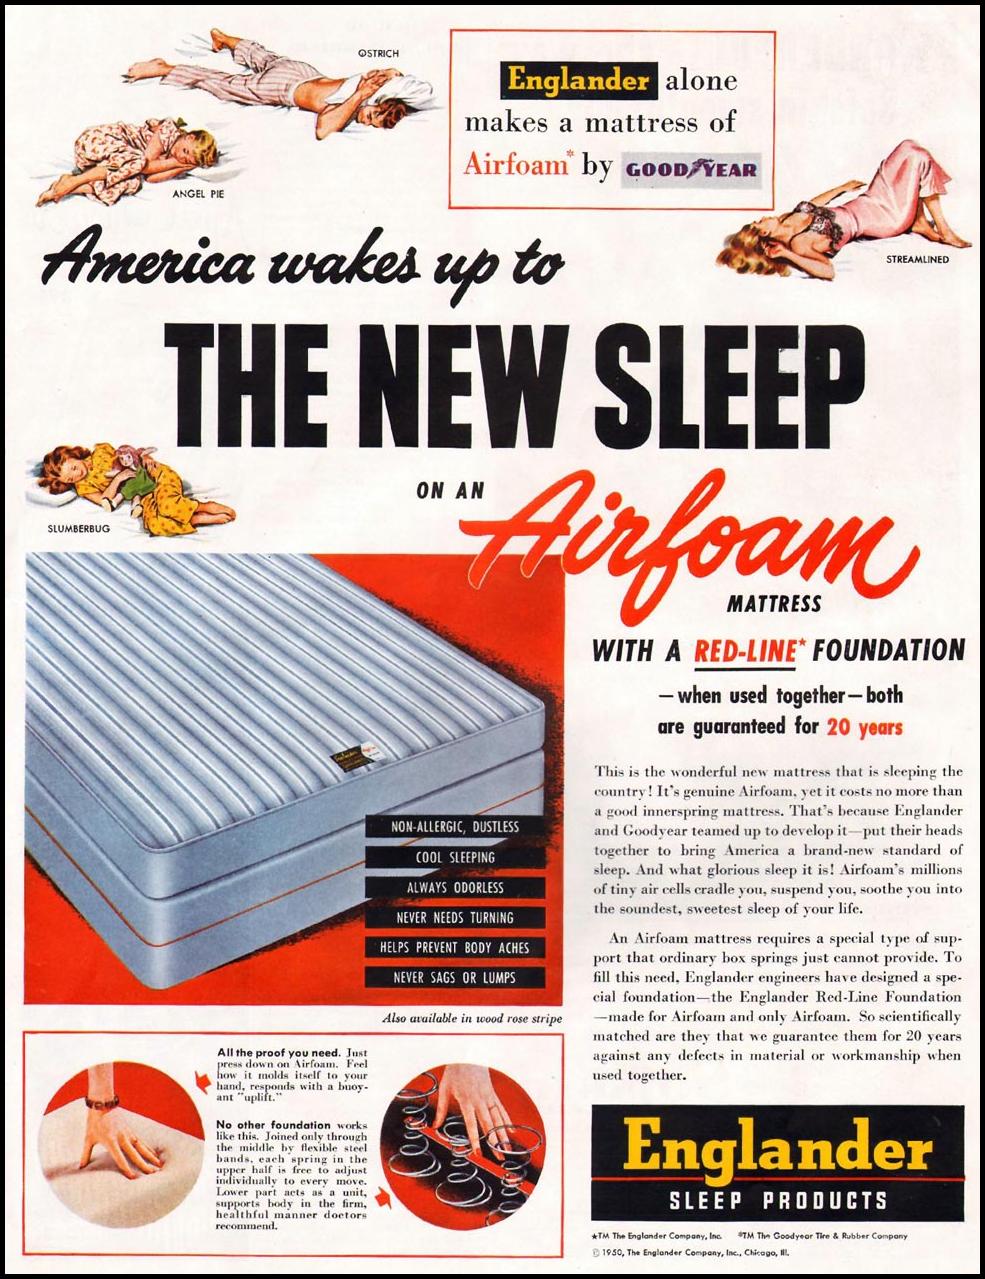 ENGLANDER SLEEP PRODUCTS WITH GOODYEAR AIRFOAM
LADIES' HOME JOURNAL
11/01/1950
p. 129